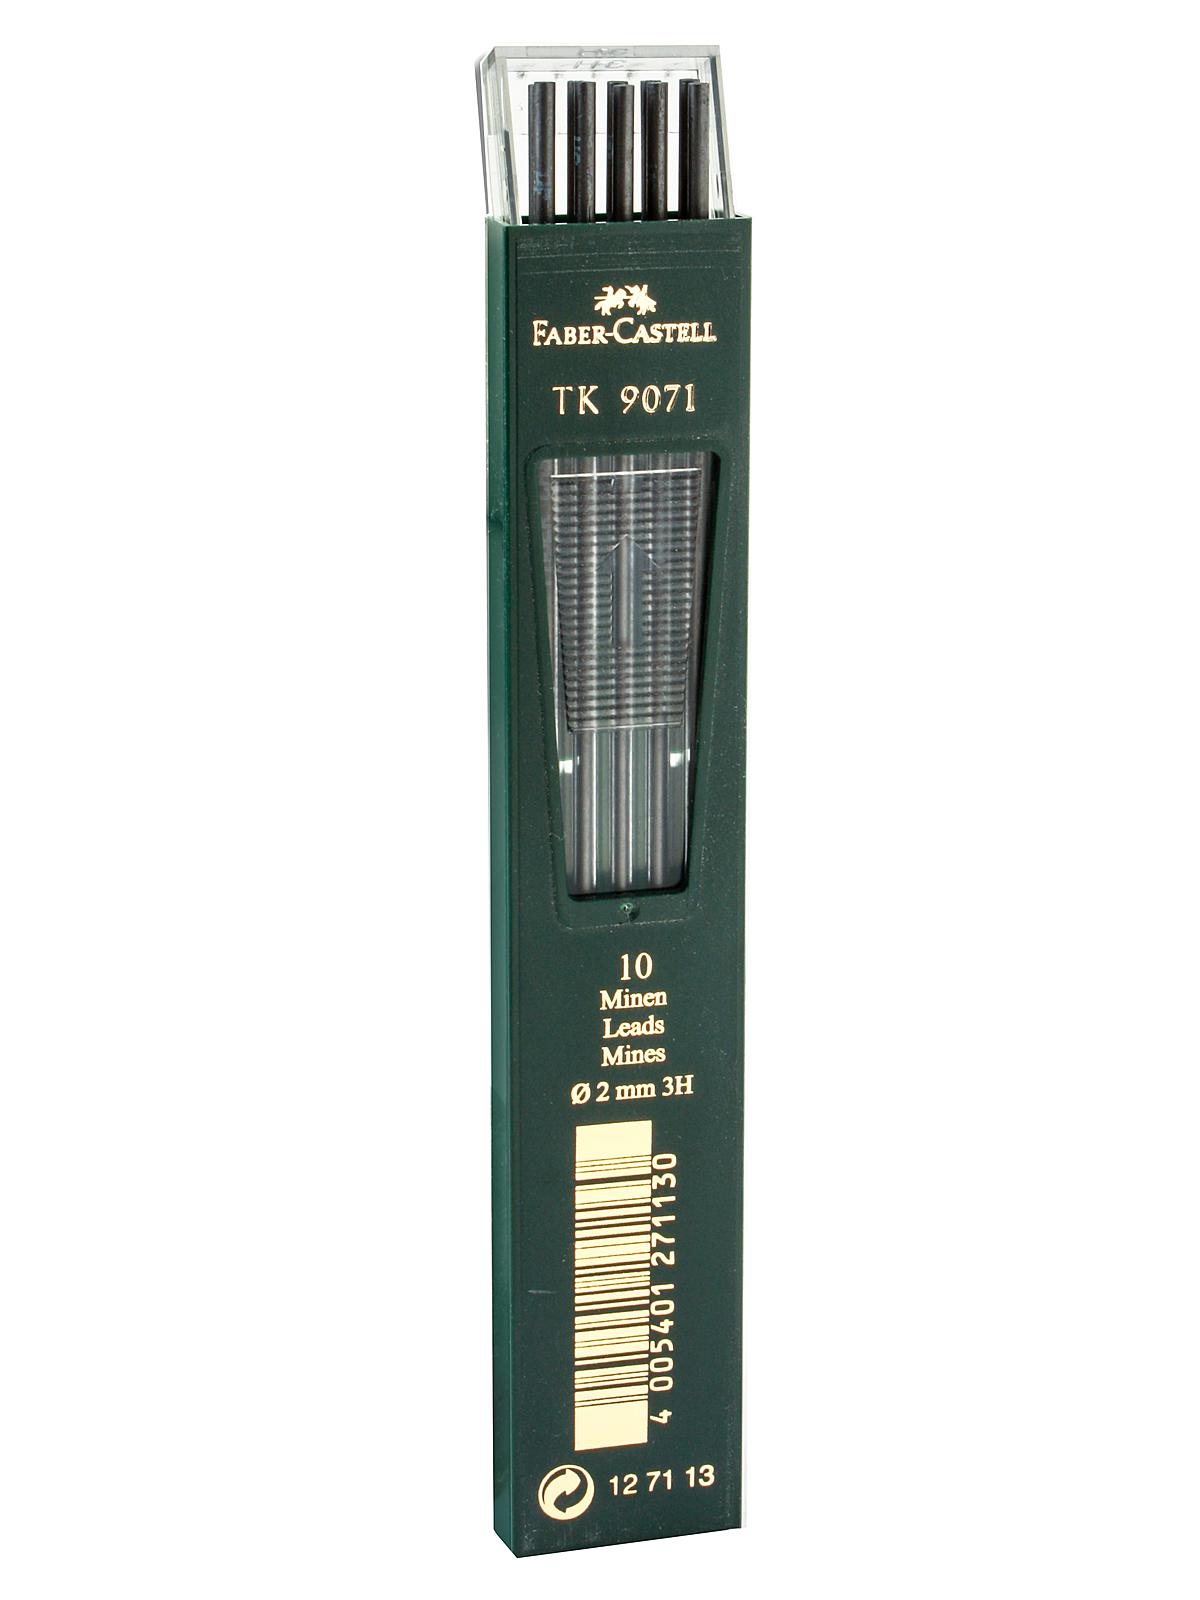 TK 9400 Clutch Drawing Pencil Leads 3H Pack Of 10